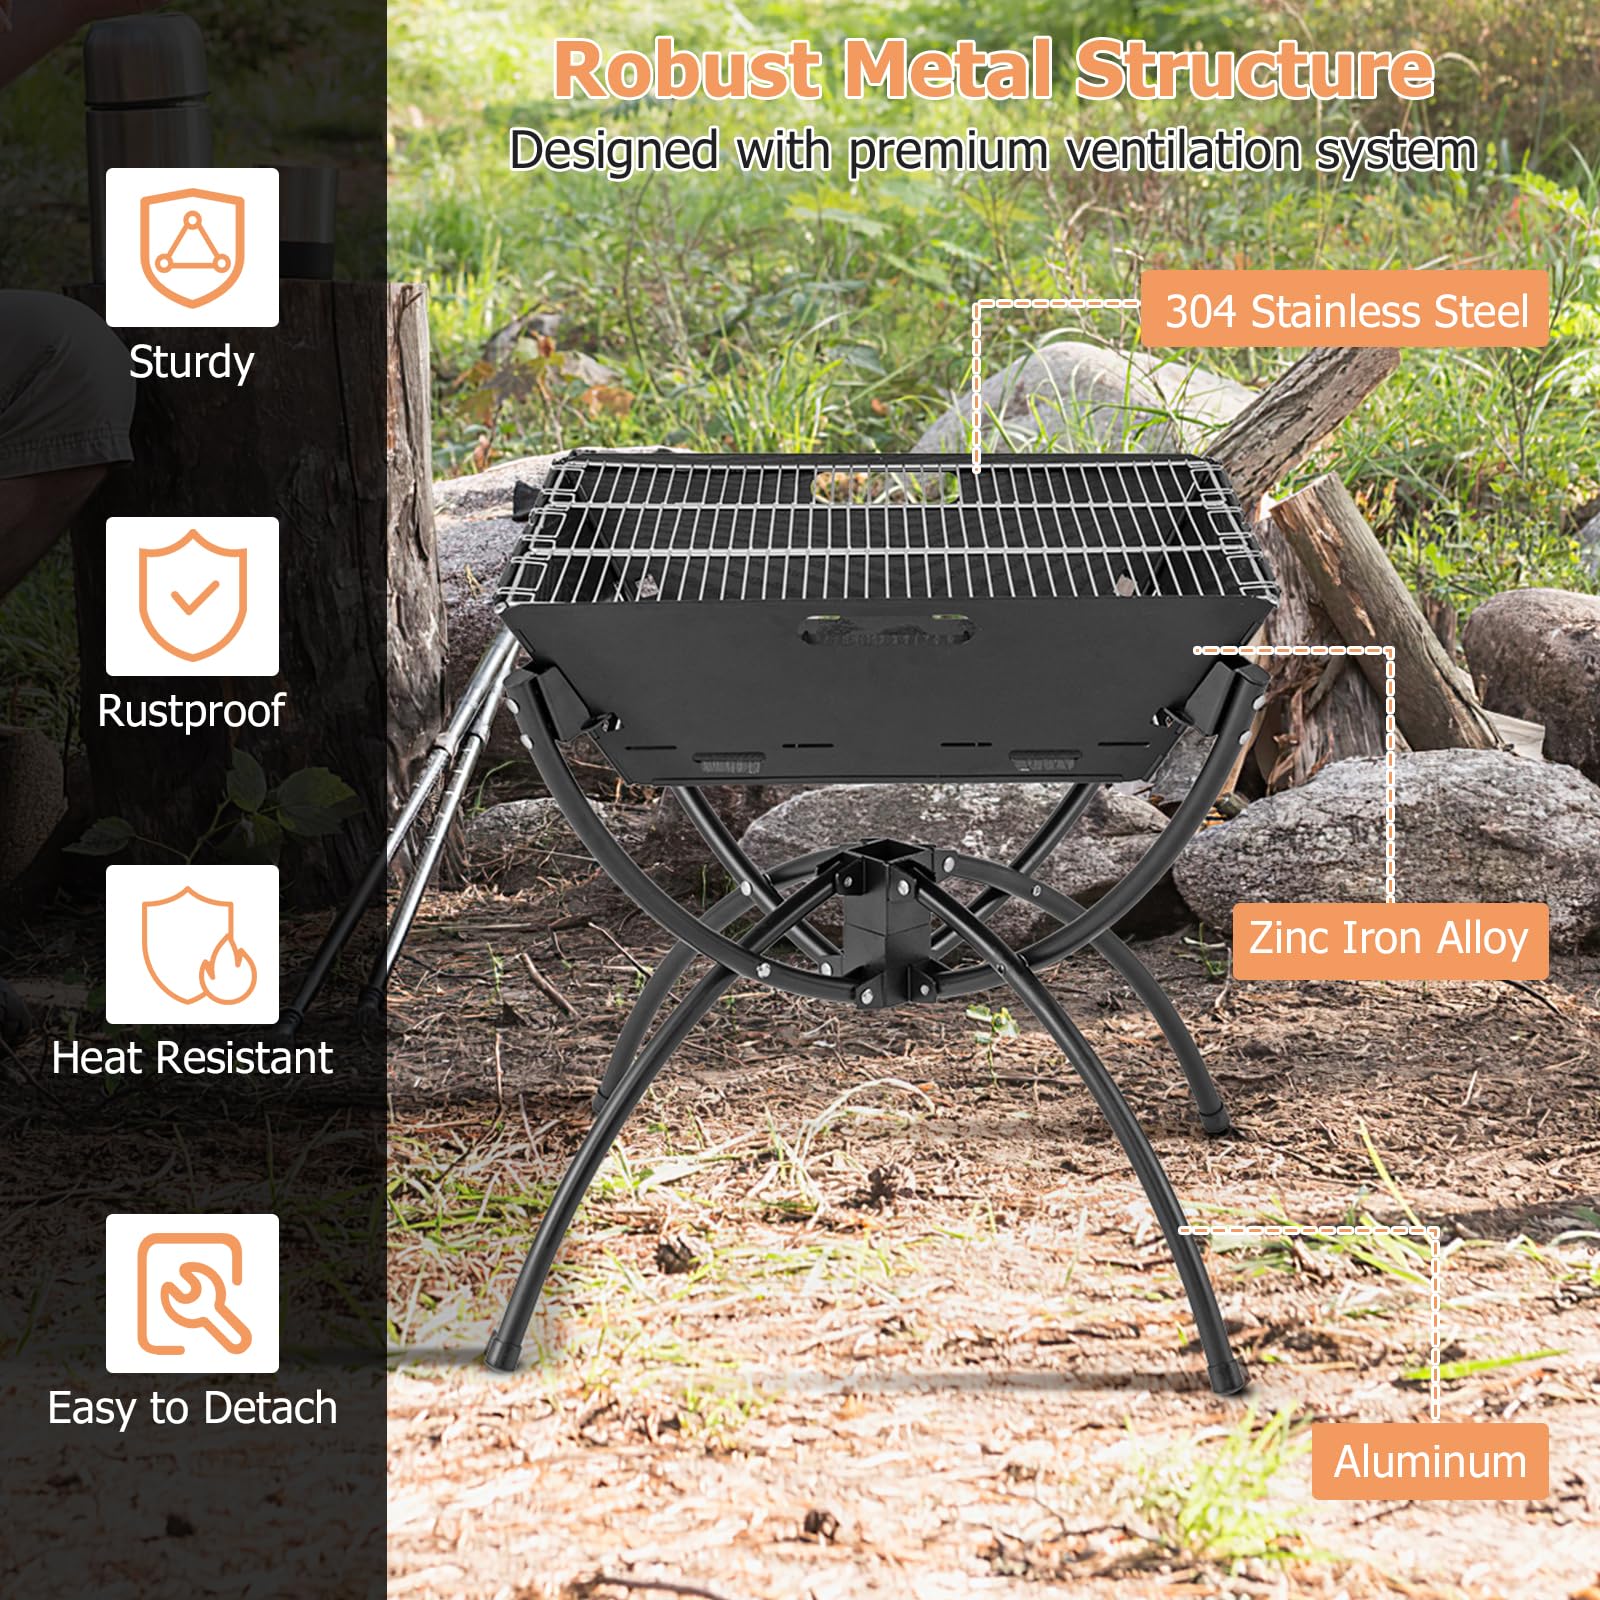 Giantex Folding Campfire Grill, Camping Fire Pit with Stainless Steel Grates, Collapsible Aluminum Legs, Carry Bag